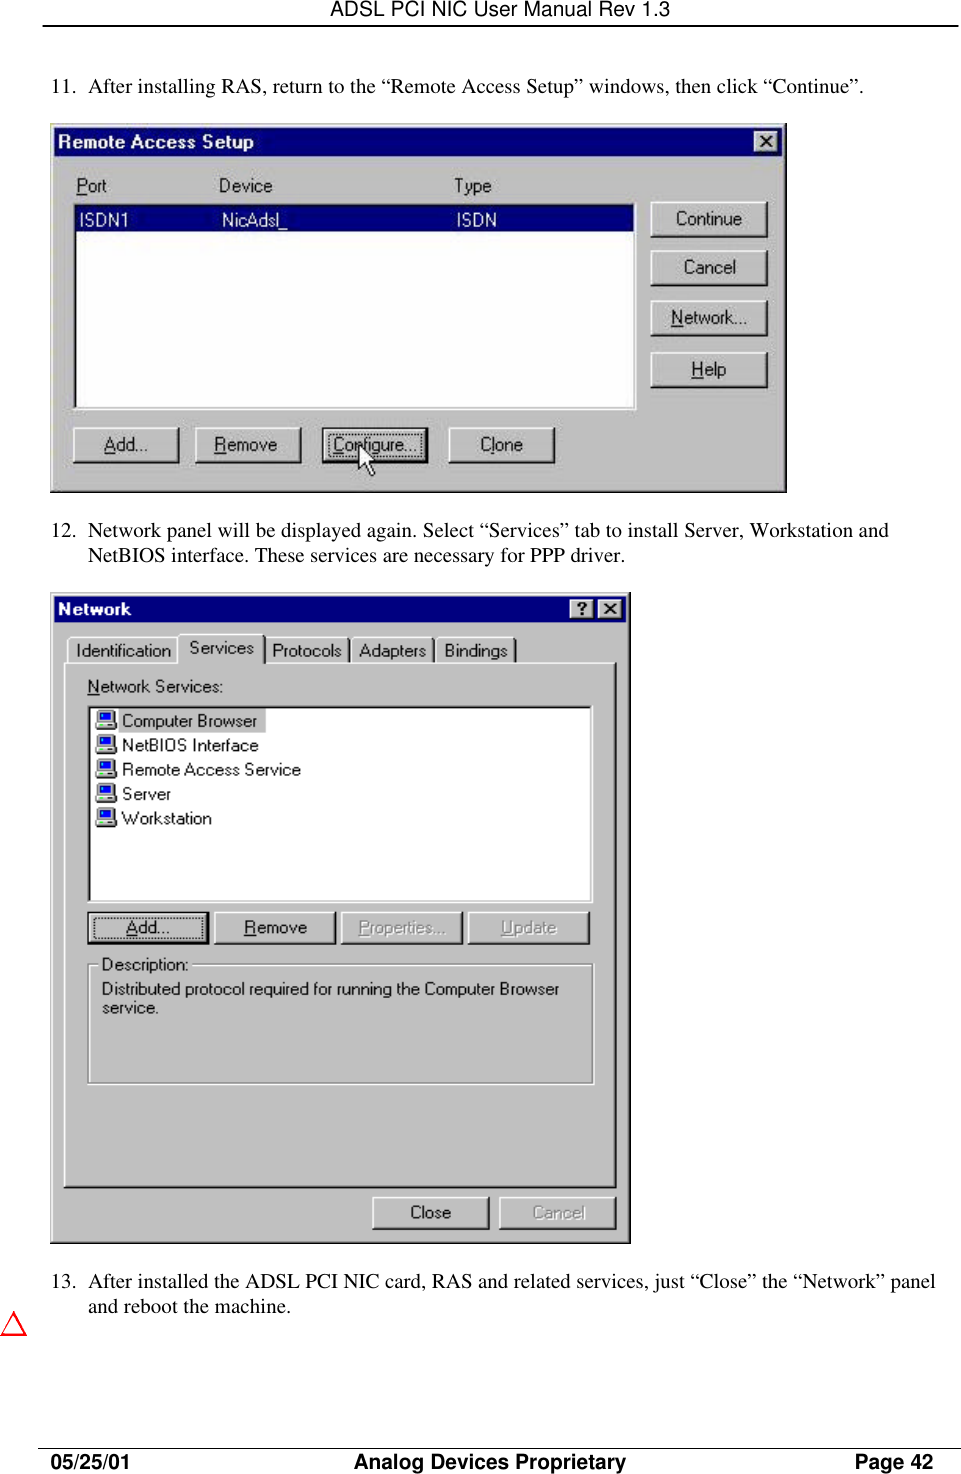 ADSL PCI NIC User Manual Rev 1.305/25/01                                     Analog Devices Proprietary                                      Page 4211. After installing RAS, return to the “Remote Access Setup” windows, then click “Continue”.12. Network panel will be displayed again. Select “Services” tab to install Server, Workstation andNetBIOS interface. These services are necessary for PPP driver.13. After installed the ADSL PCI NIC card, RAS and related services, just “Close” the “Network” paneland reboot the machine.